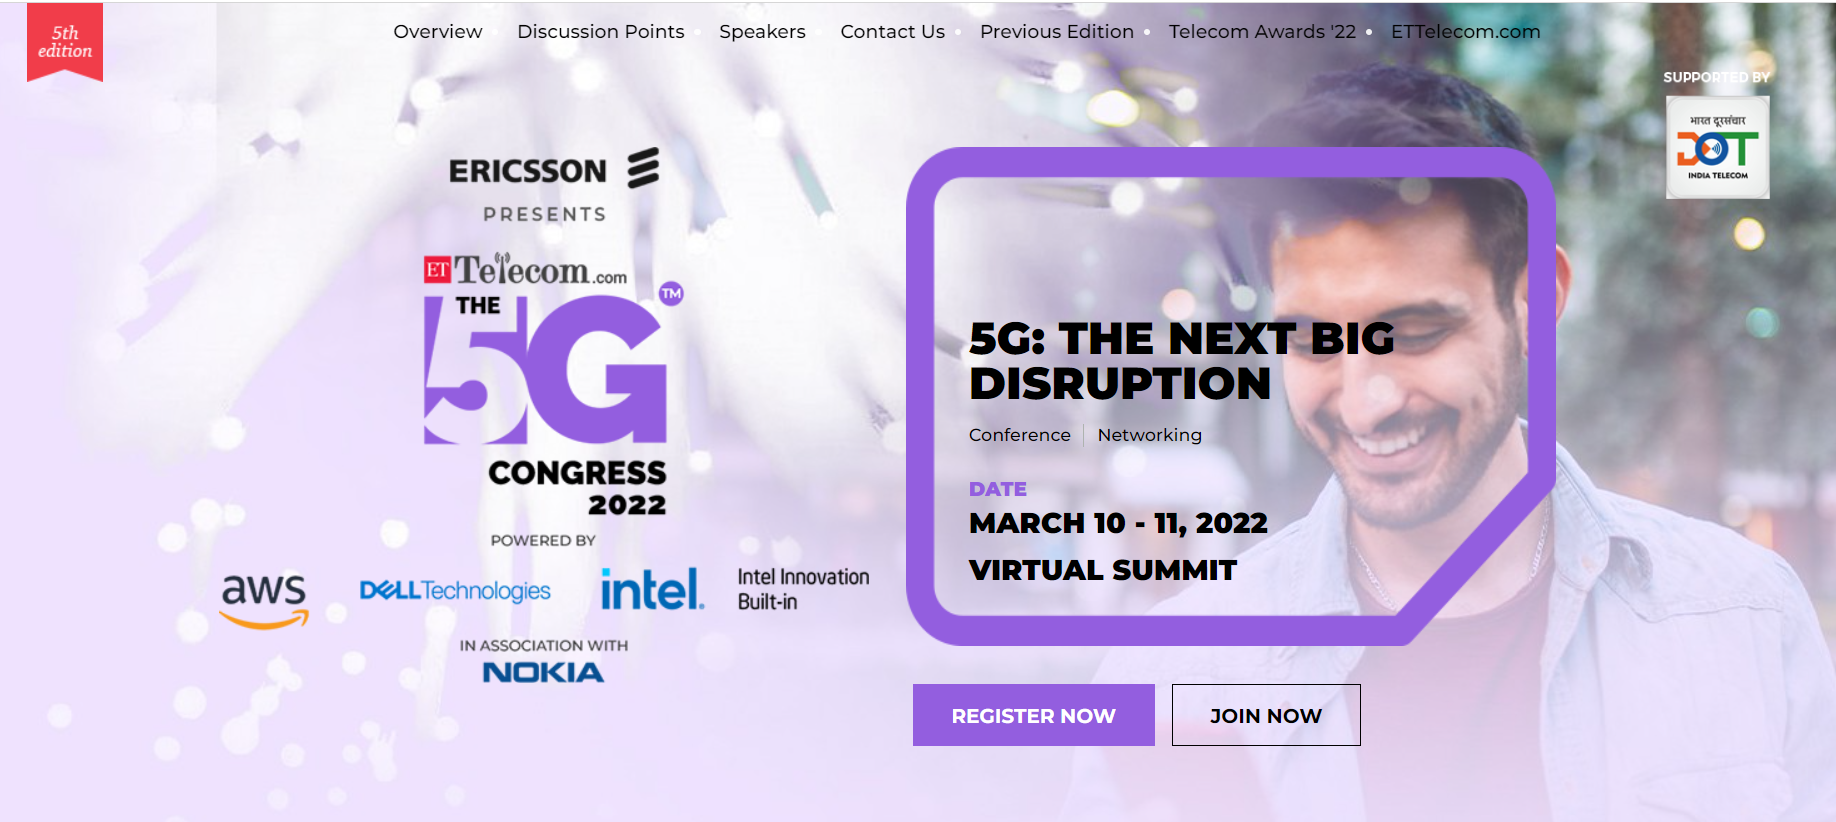 Top industry executives, policymakers will attend the 5G Congress 2022